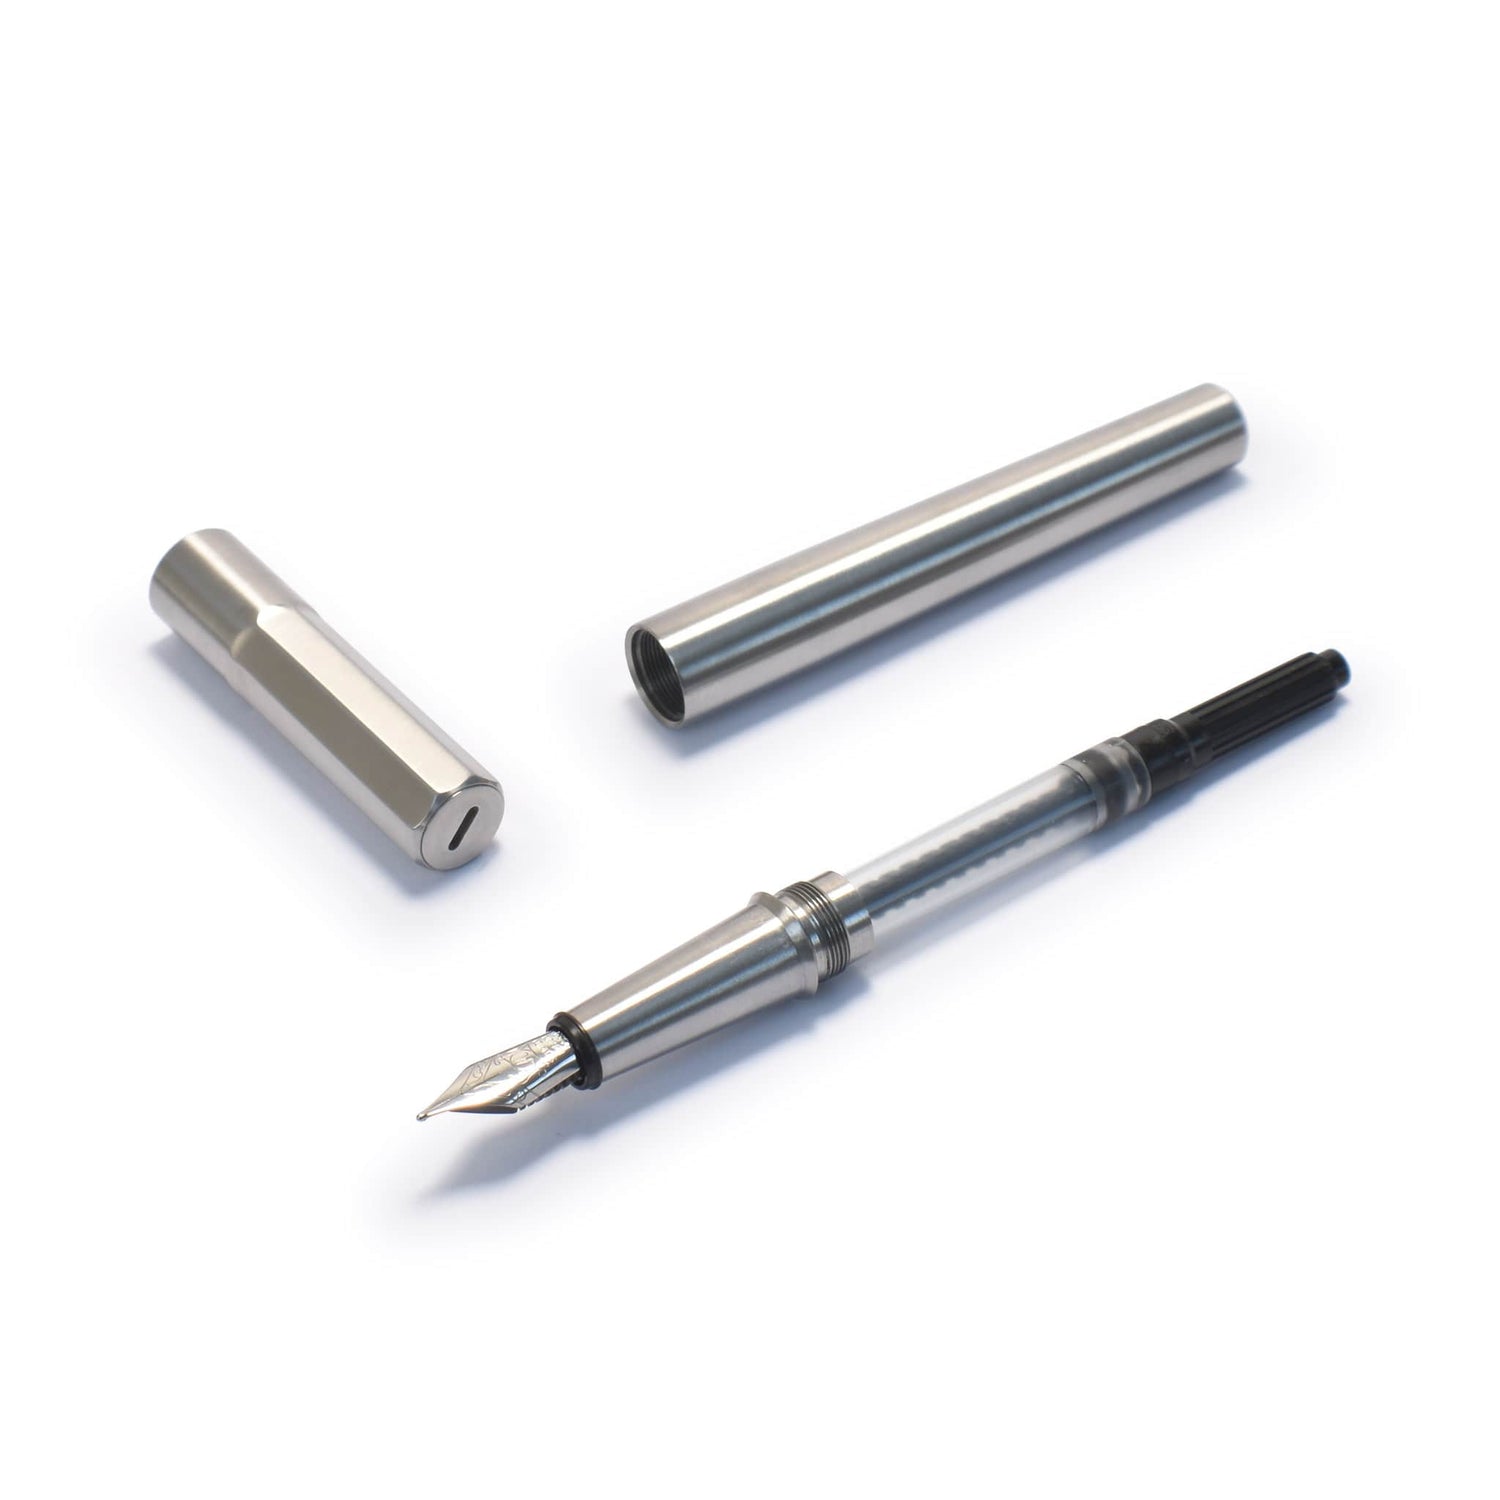 Stainless steel fountain pen from Andhand. Shown here disassembled.